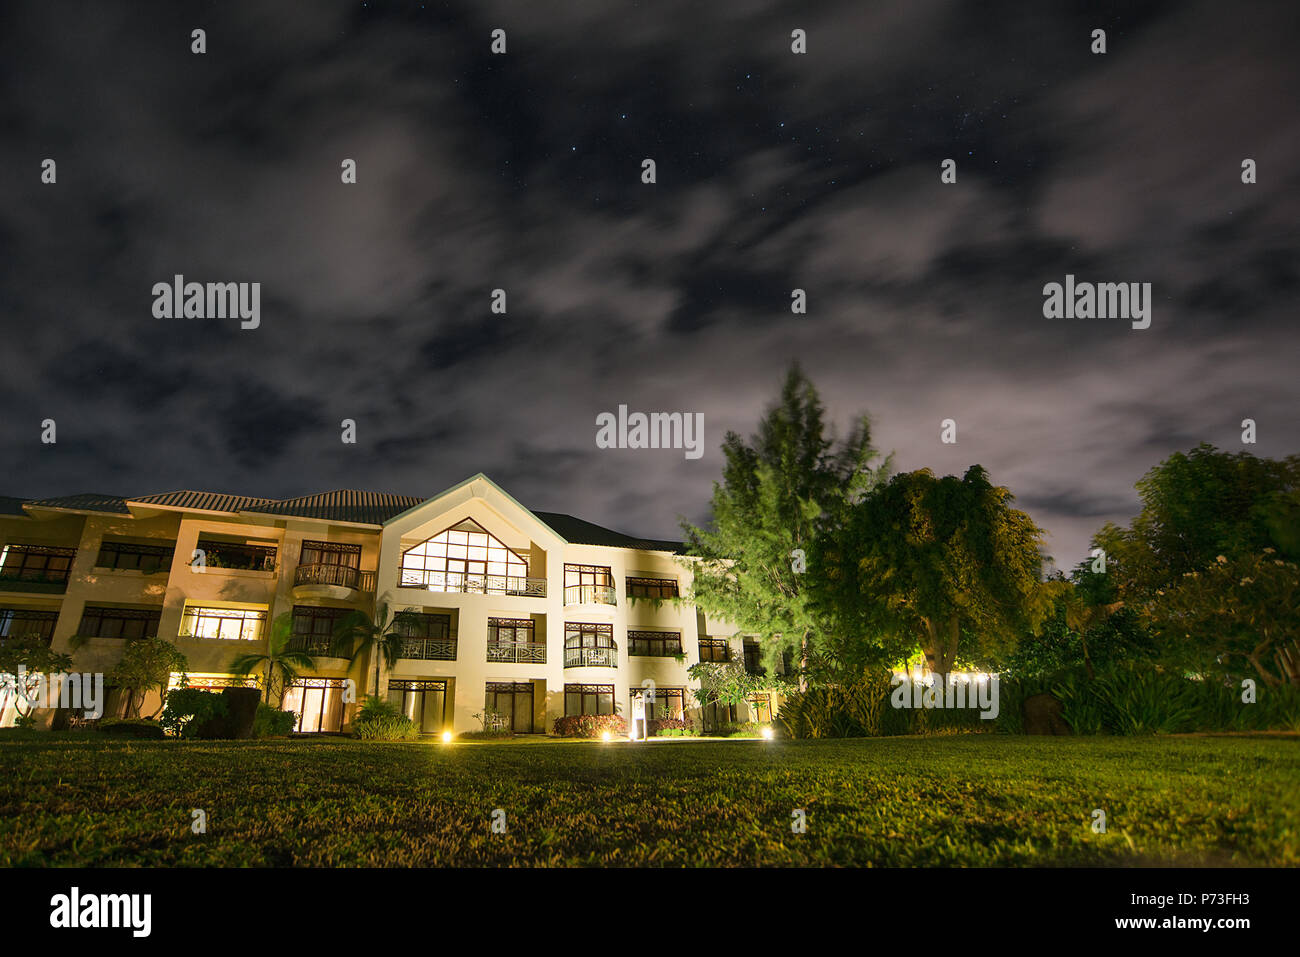 Wide angle ground level shot of a hotel in Mauritius at night with moving clouds, lights, trees, lawn Stock Photo